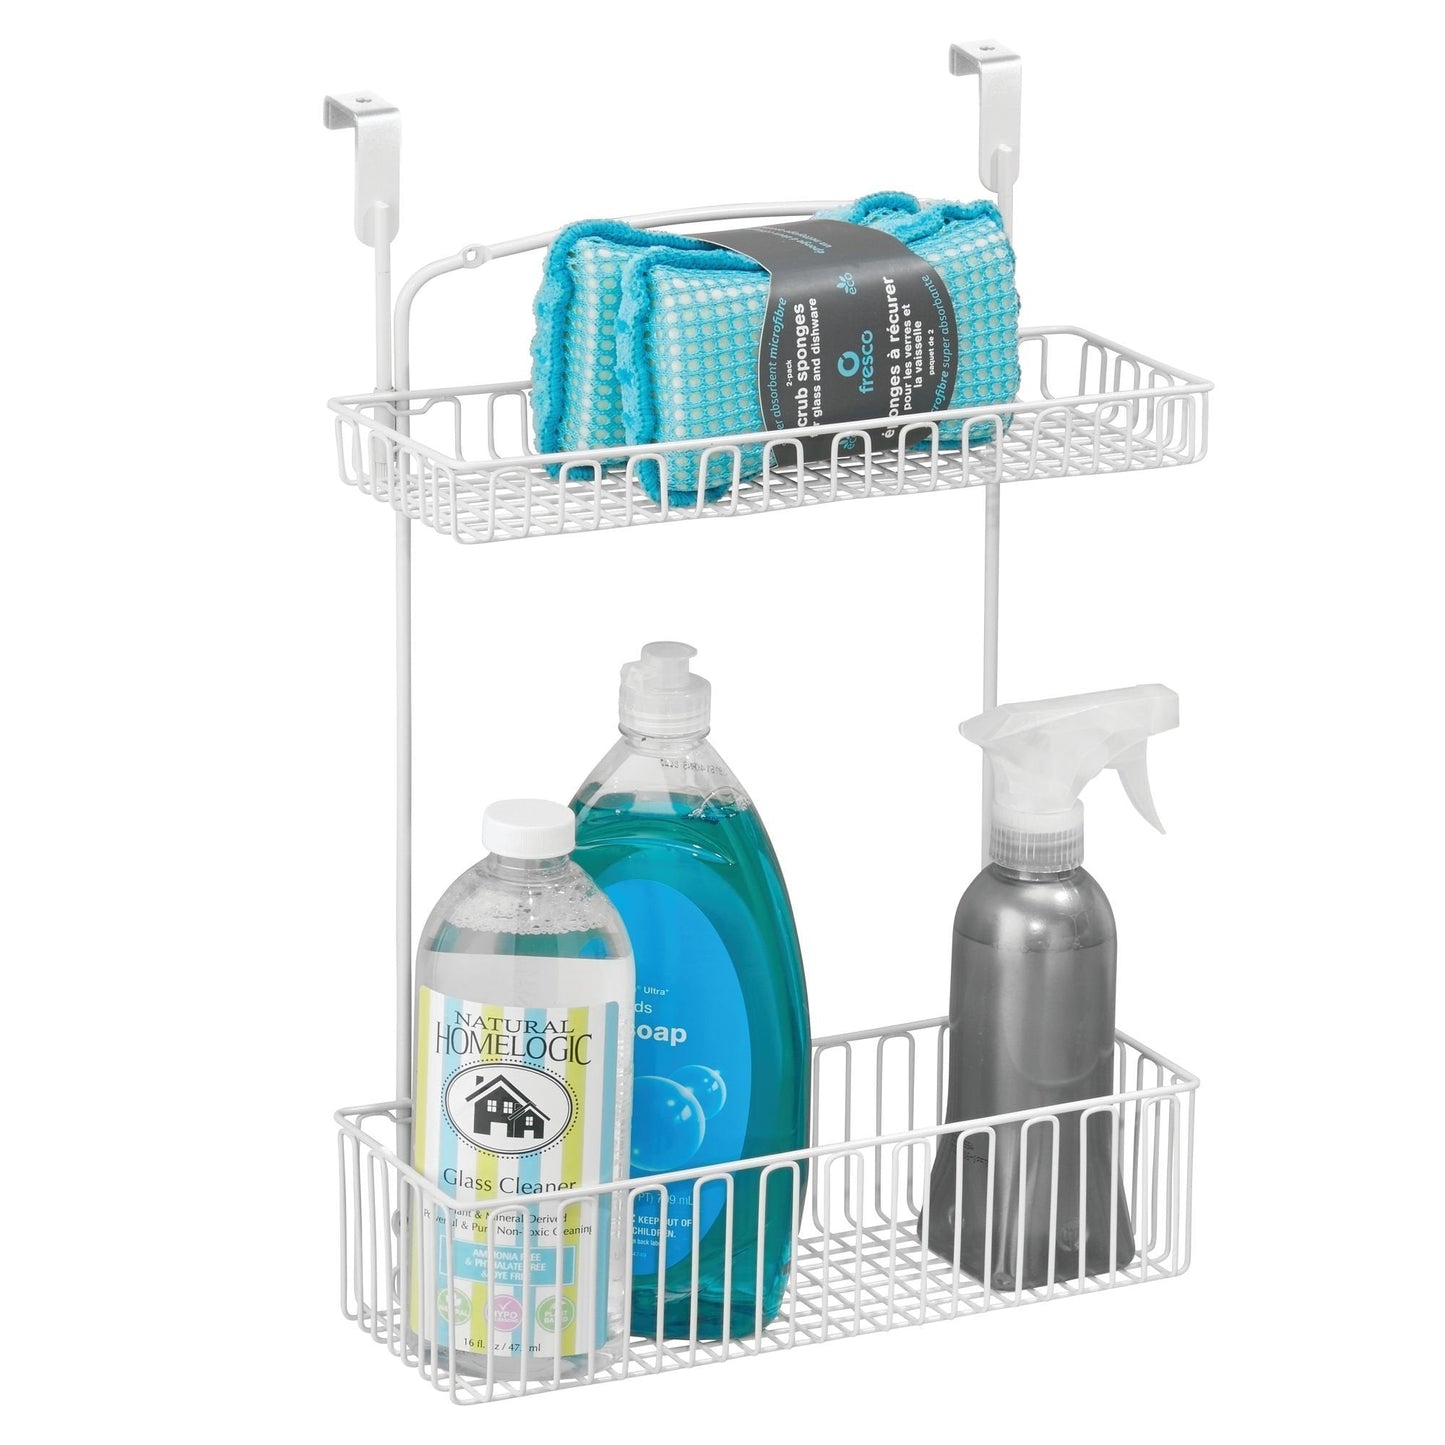 Top metal farmhouse over cabinet kitchen storage organizer holder or basket hang over cabinet doors in kitchen pantry holds dish soap window cleaner sponges 2 pack matte white